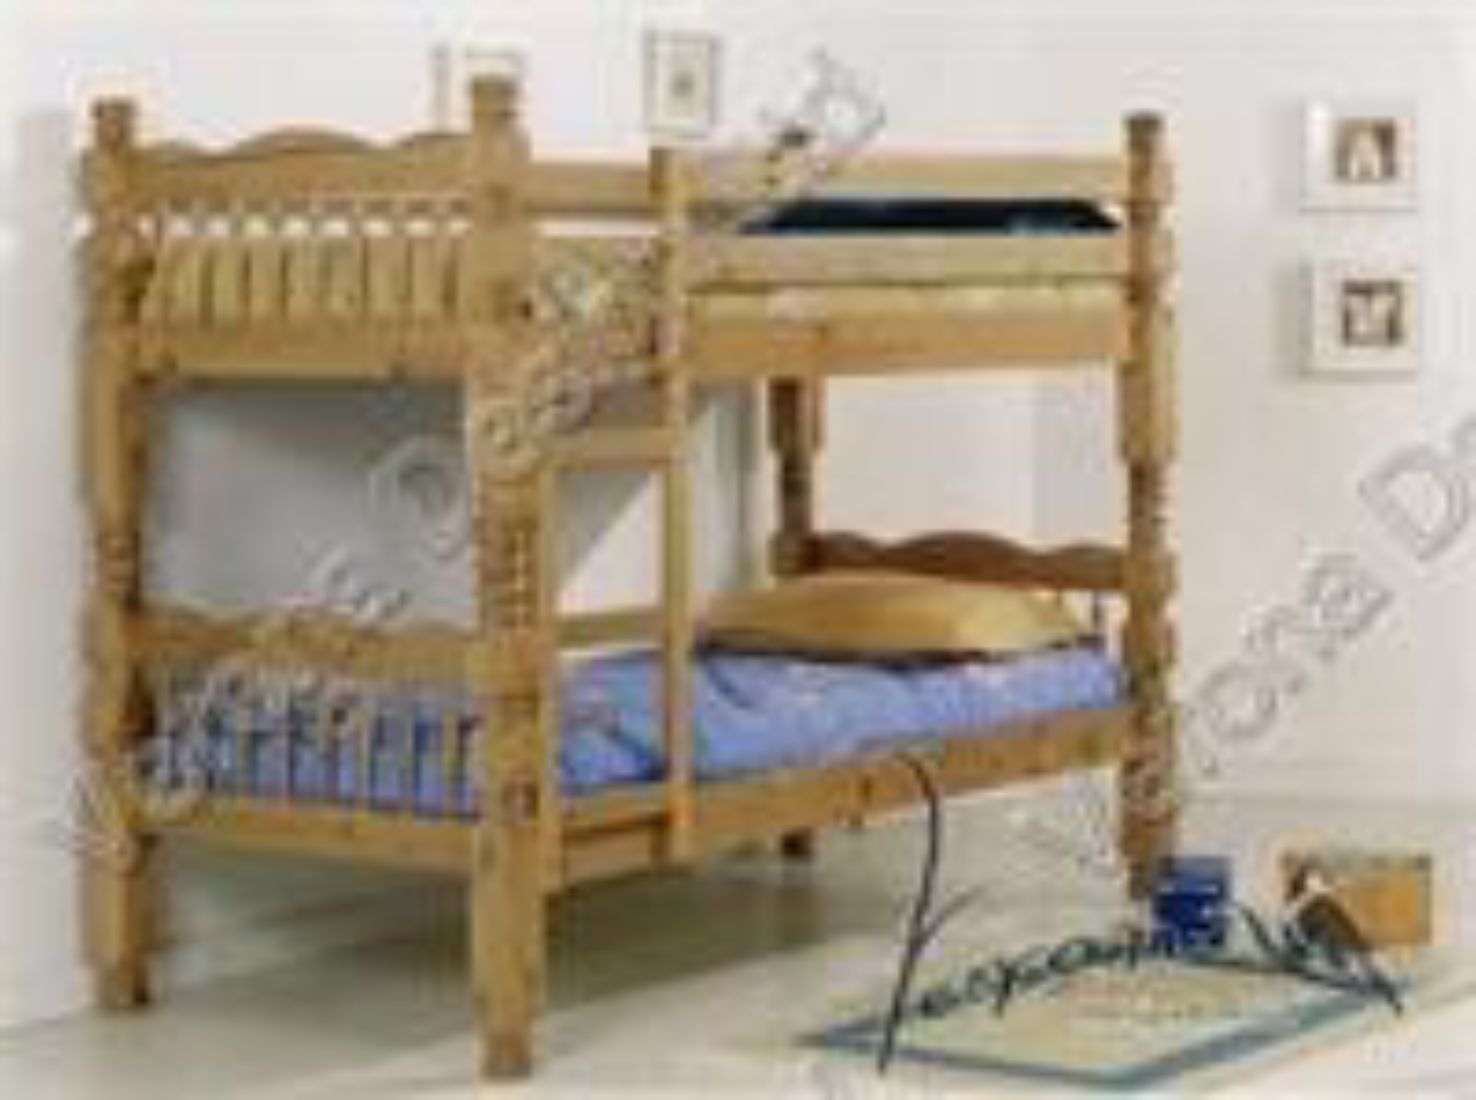 ... to fit Verona Trieste bunk bed - mattress size is 3' 190 x 90 cm